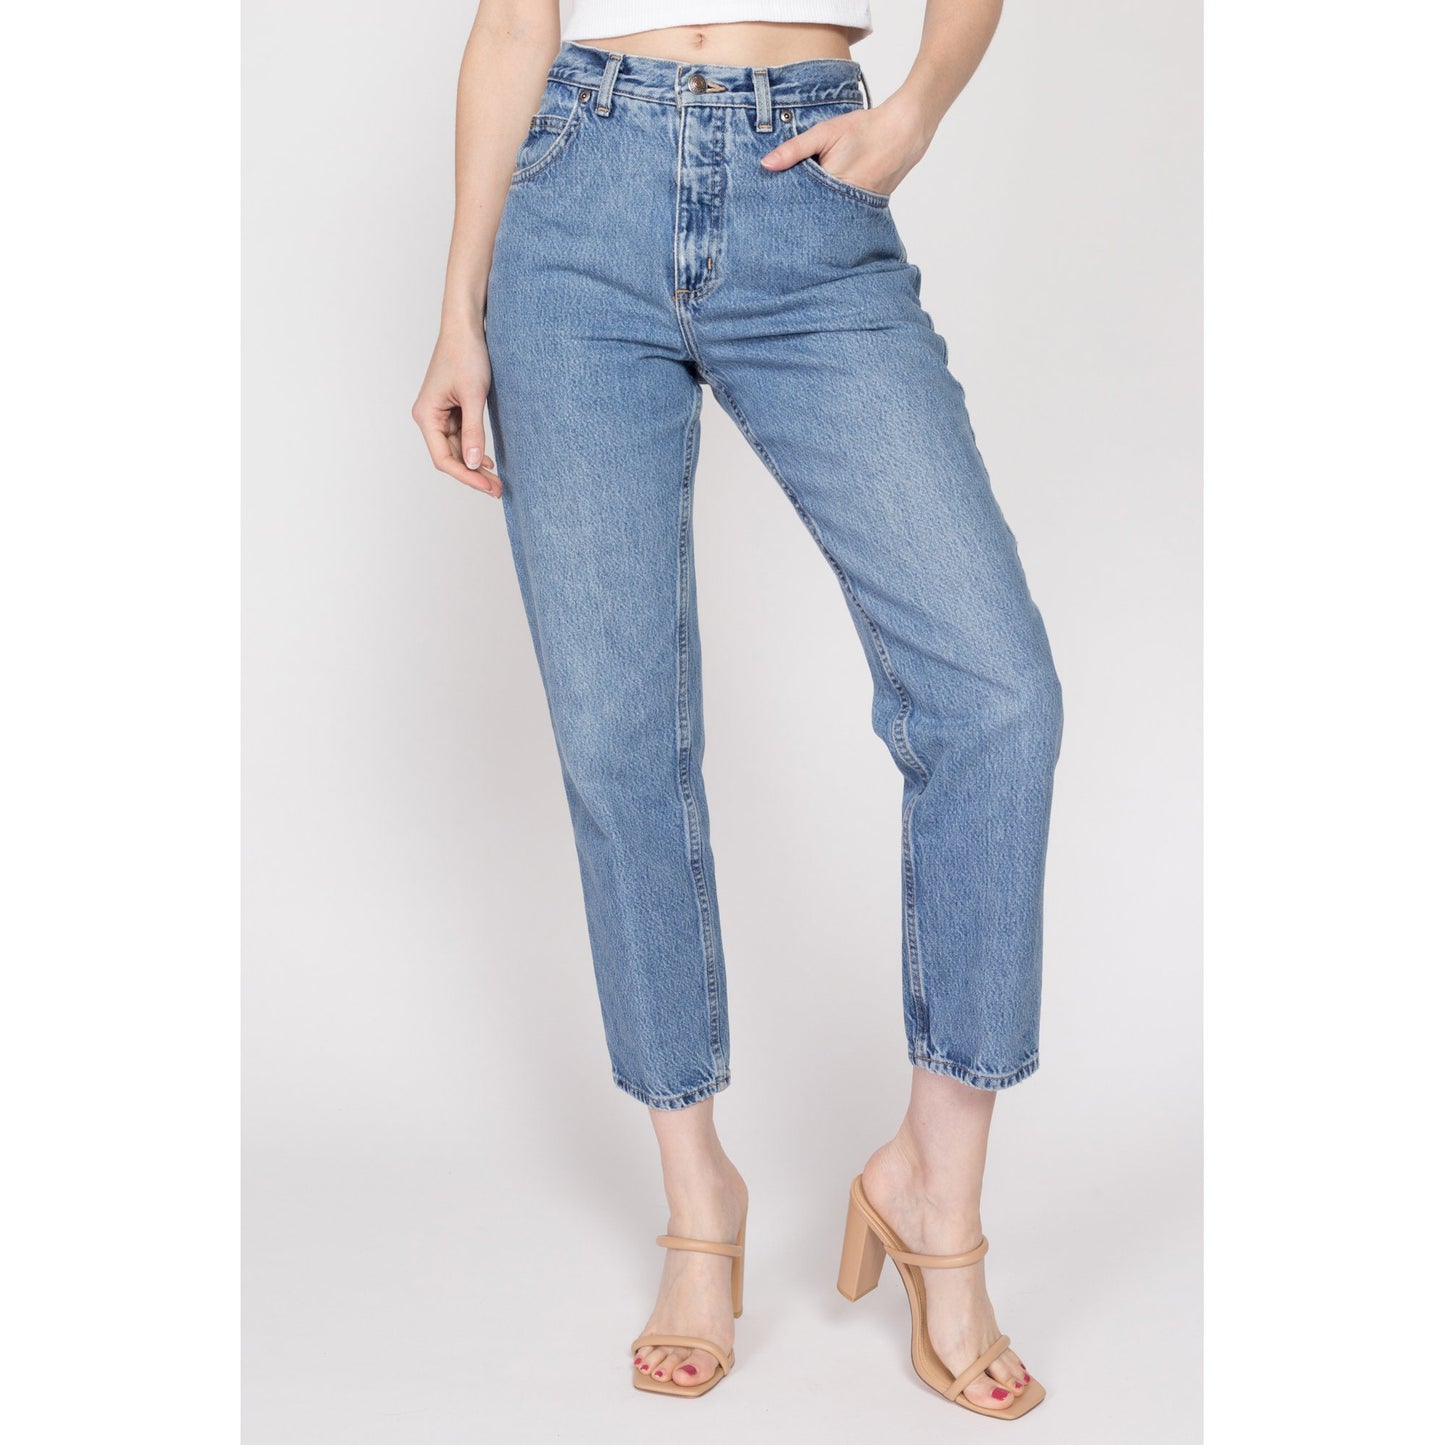 Small 90s High Waisted Stonewash Mom Jeans 26.5" Petite | Vintage Lands End Denim Tapered Leg High Rise Jeans